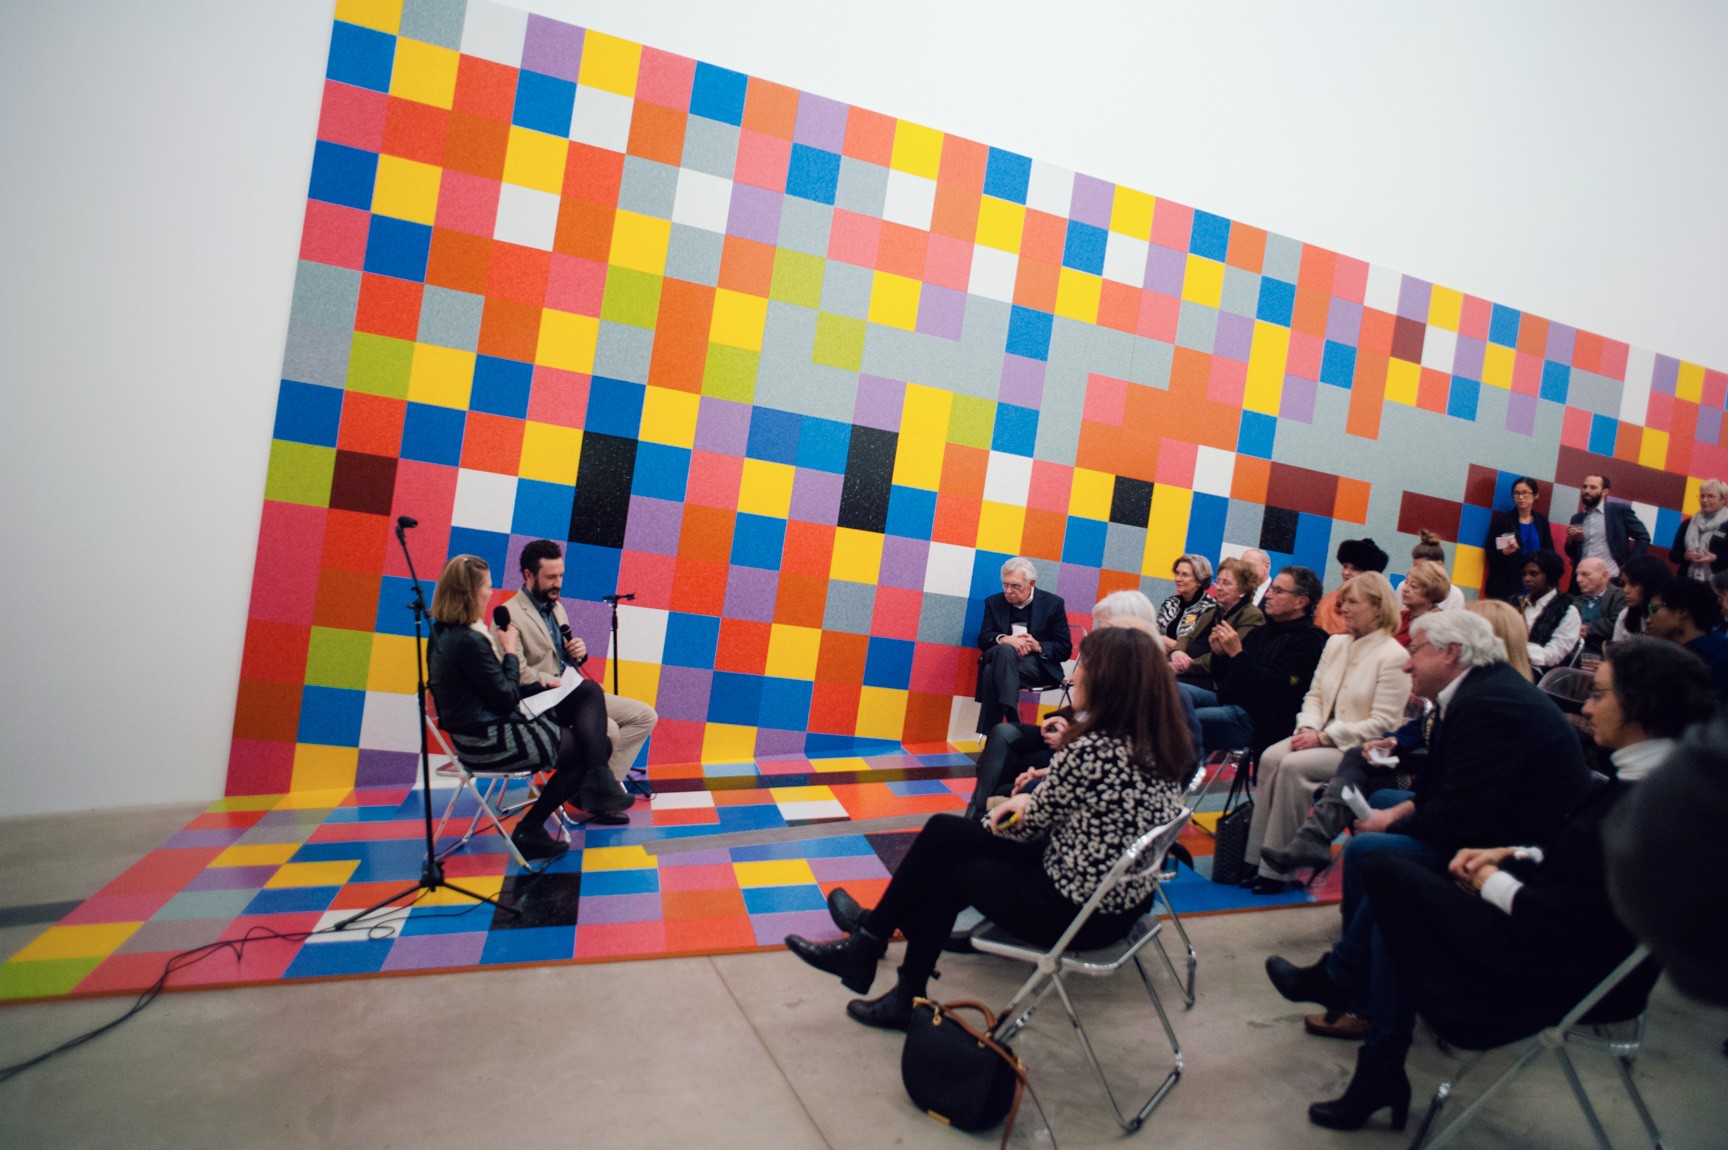 David Scanavino and an interviewer sit and speak into microphones for a seated audience in the Main Gallery, on Scanavino's colorful gridded installation, "Candy Crush."